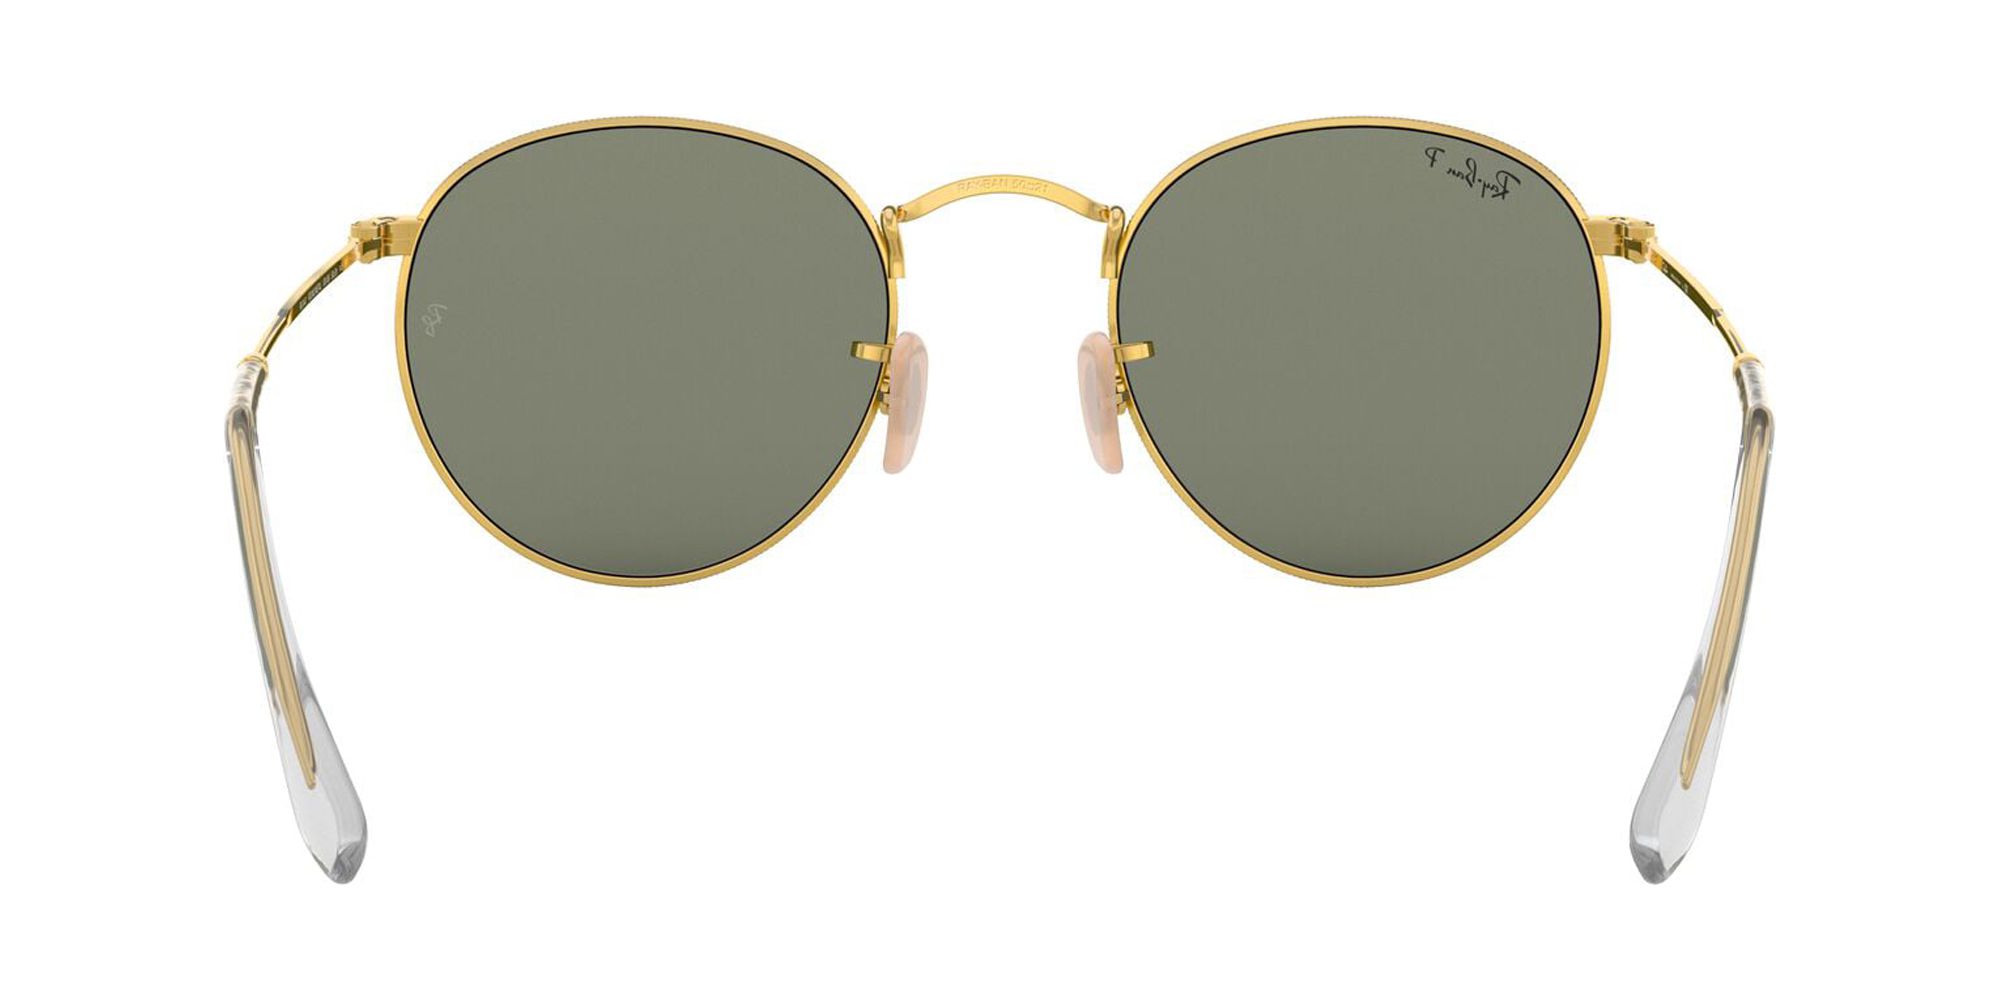 Ray-Ban RB3447 Round Metal Sunglasses - image 7 of 12